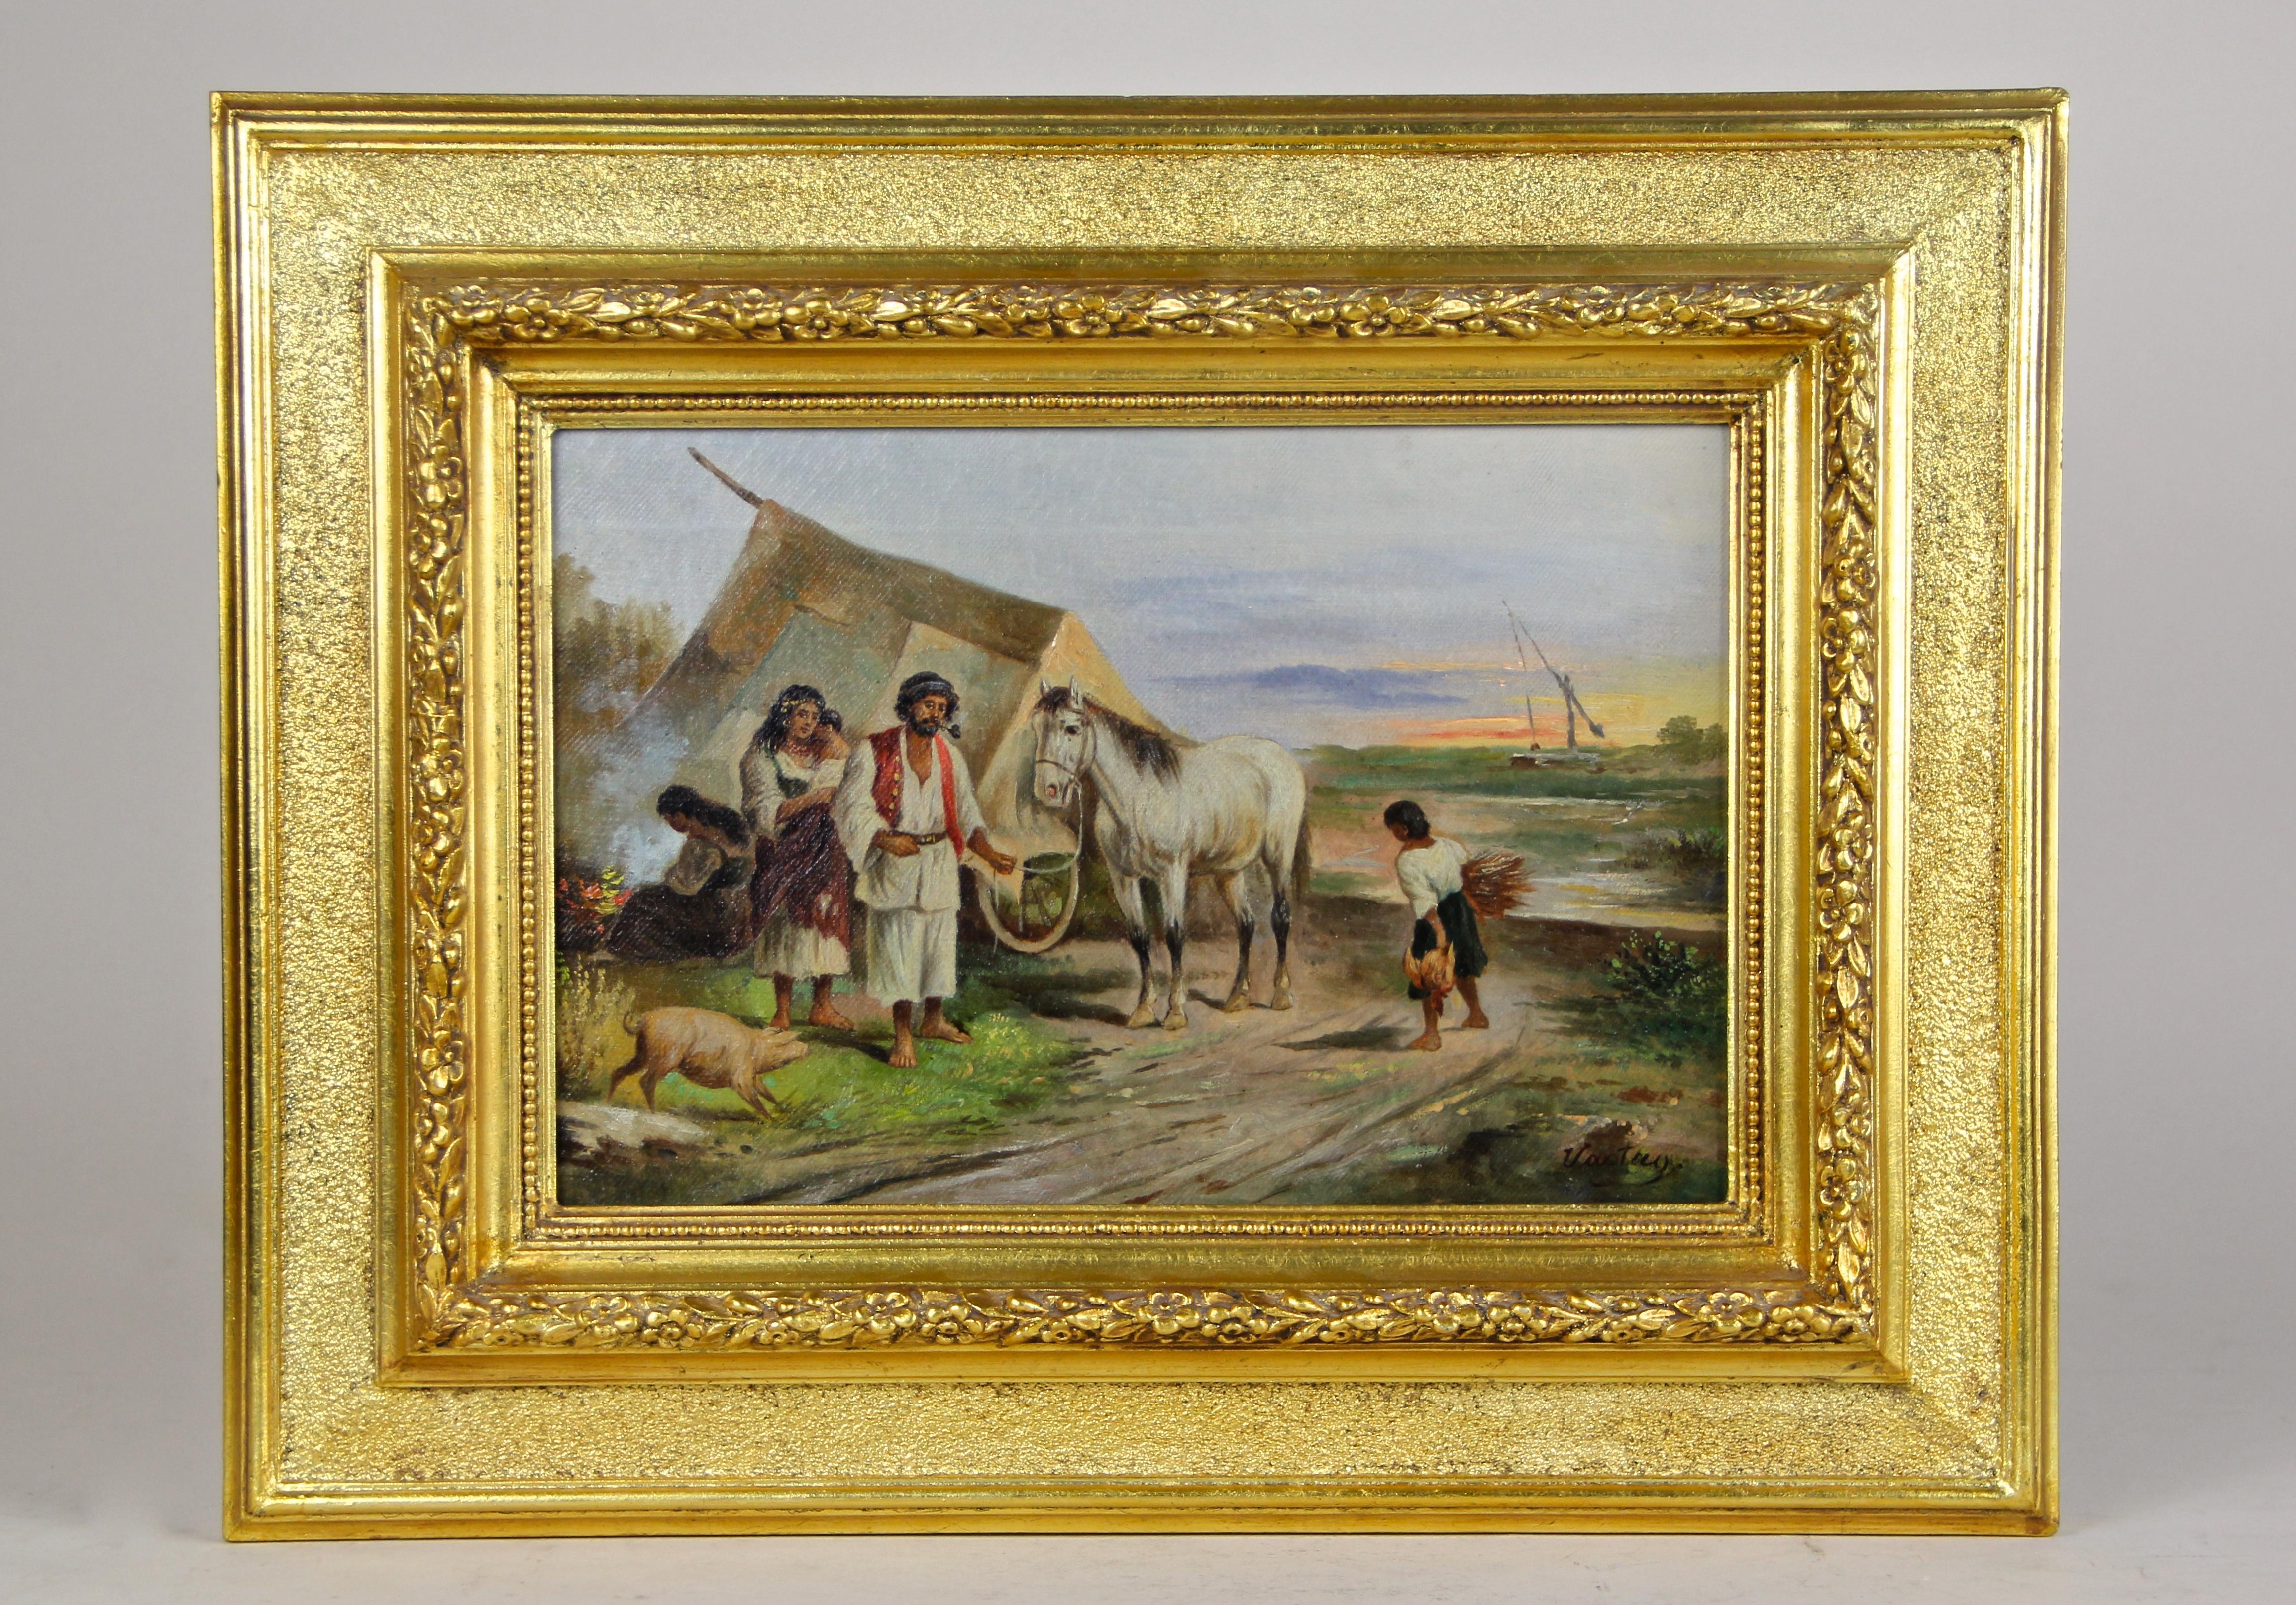 Lovely pair of 19th century oil paintings out of Hungary from circa 1870. Both paintings were signed by the artist and artfully made with love to details. The two different scenes in the Hungarian lowlands show shepherds with their families and come